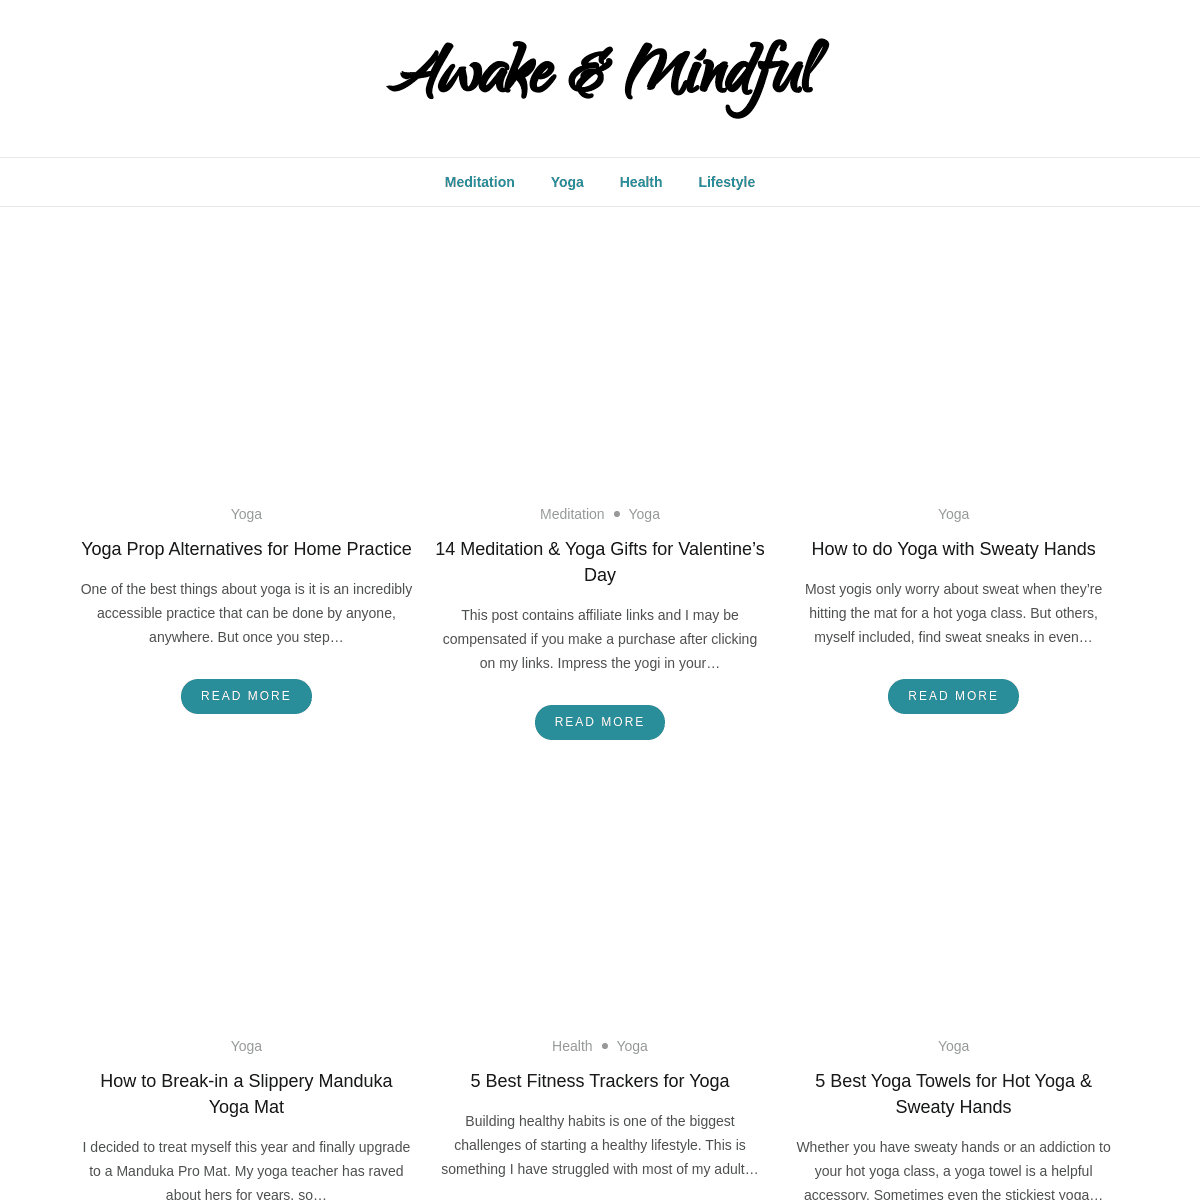 A complete backup of https://awakeandmindful.com